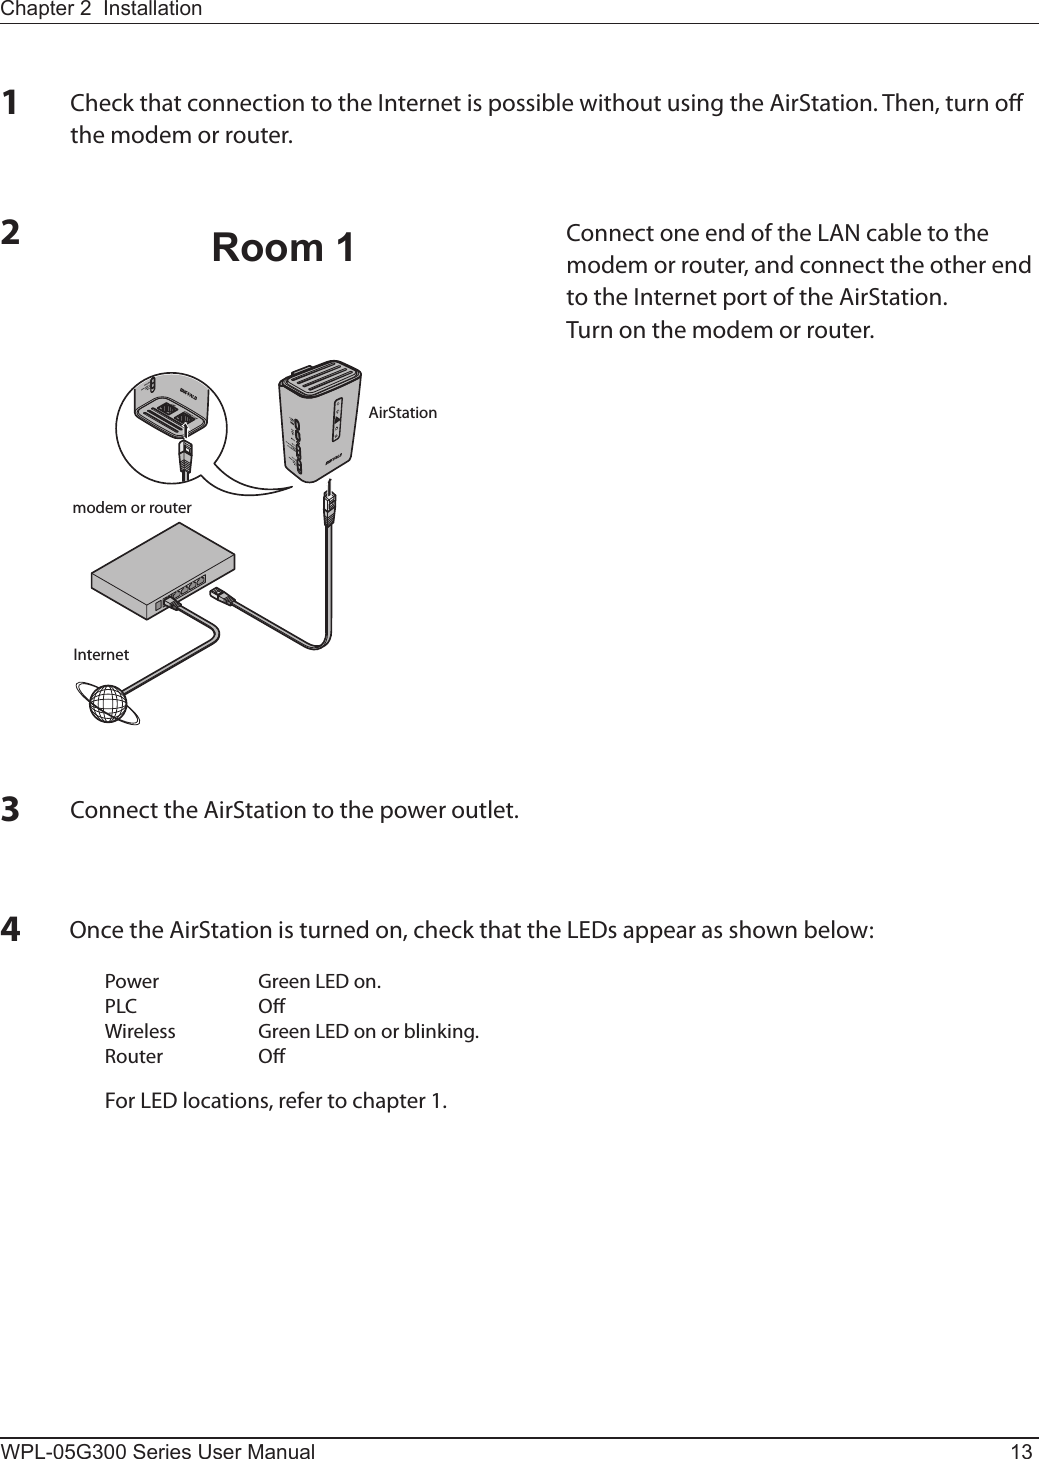 Room 1modem or routerInternetAirStationChapter 2  InstallationWPL-05G300 Series User Manual 131Check that connection to the Internet is possible without using the AirStation. Then, turn o the modem or router. 234Connect one end of the LAN cable to the modem or router, and connect the other end to the Internet port of the AirStation.Turn on the modem or router.Connect the AirStation to the power outlet.Once the AirStation is turned on, check that the LEDs appear as shown below:Power  Green LED on.PLC  OWireless  Green LED on or blinking.Router  OFor LED locations, refer to chapter 1.